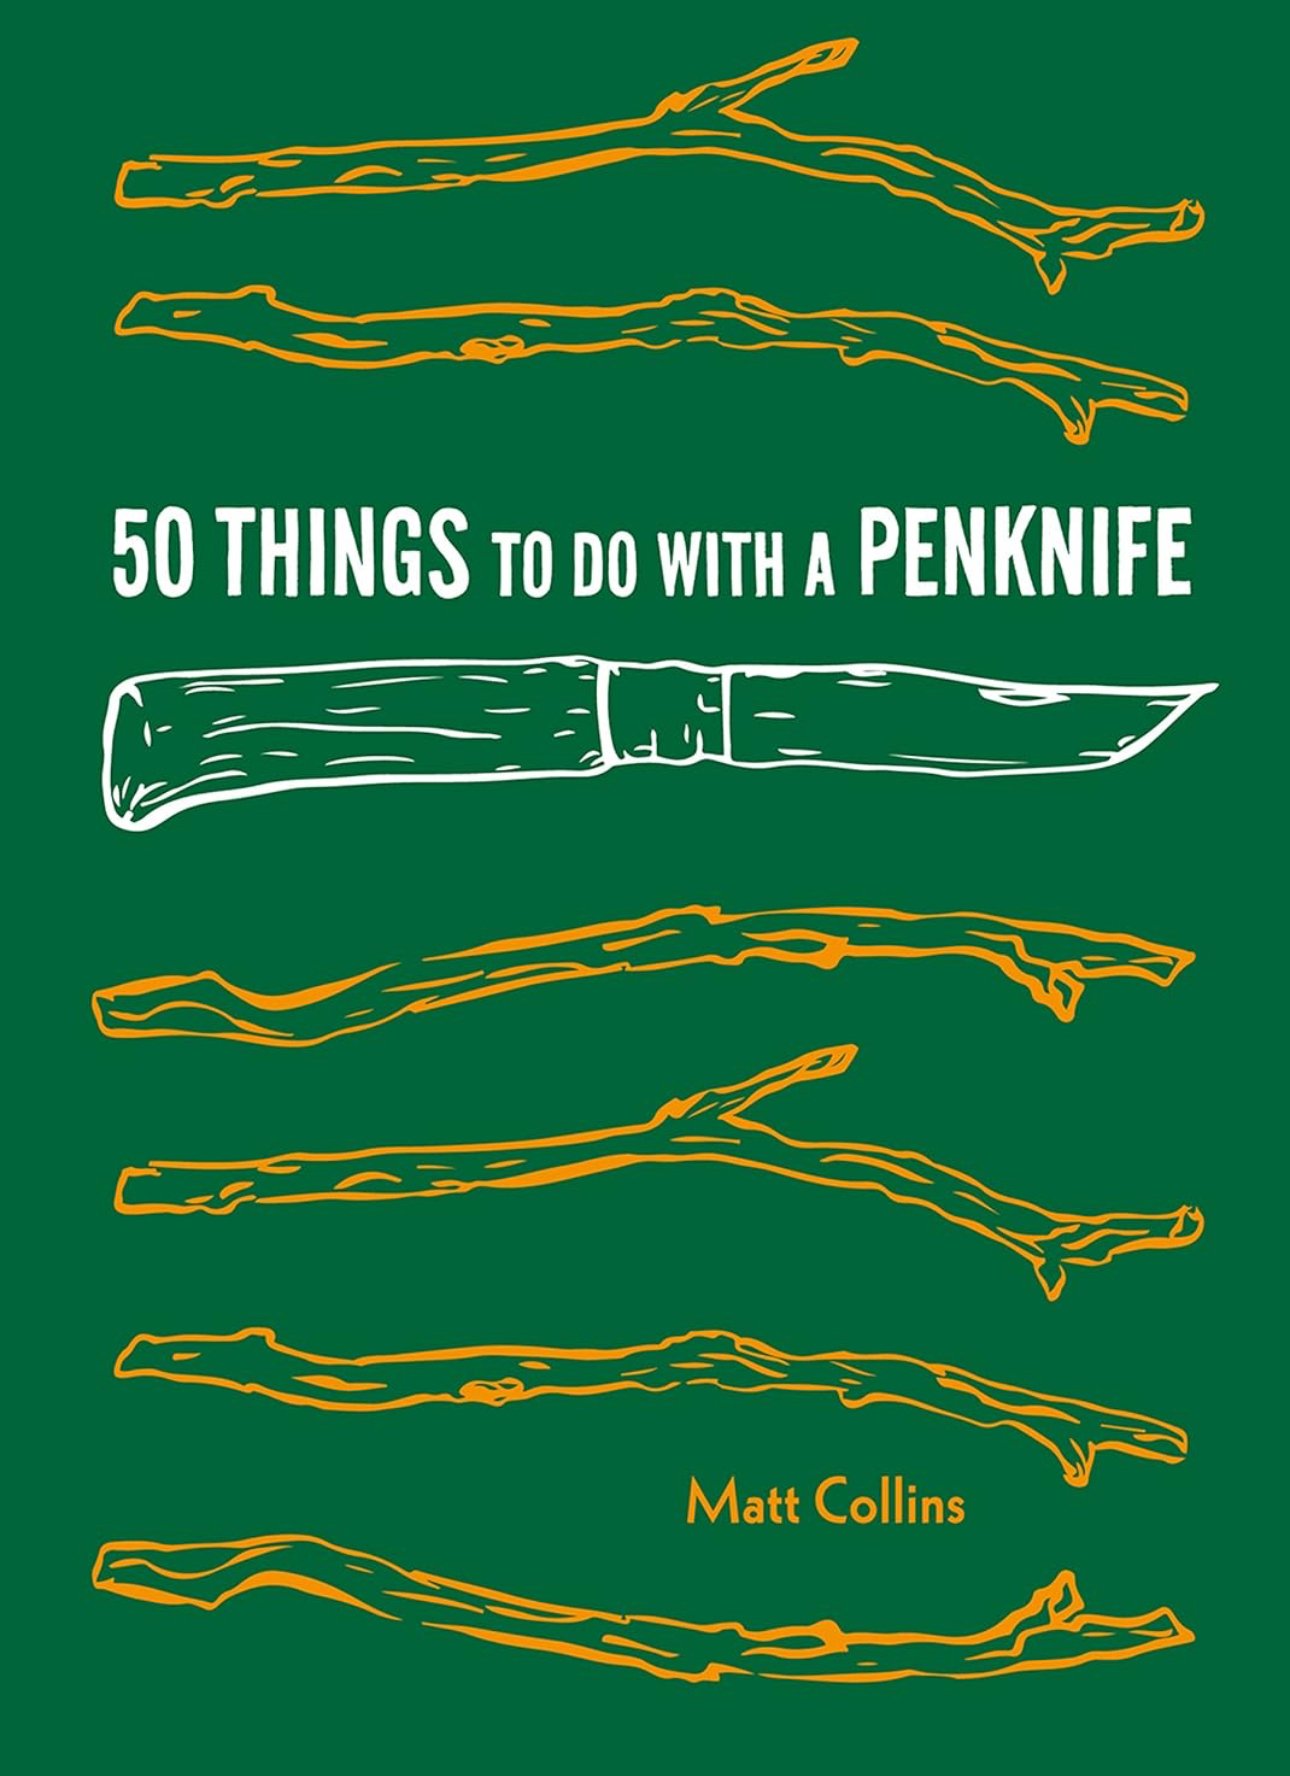 50 Things to Do with a Pen Knife by Matt Collins